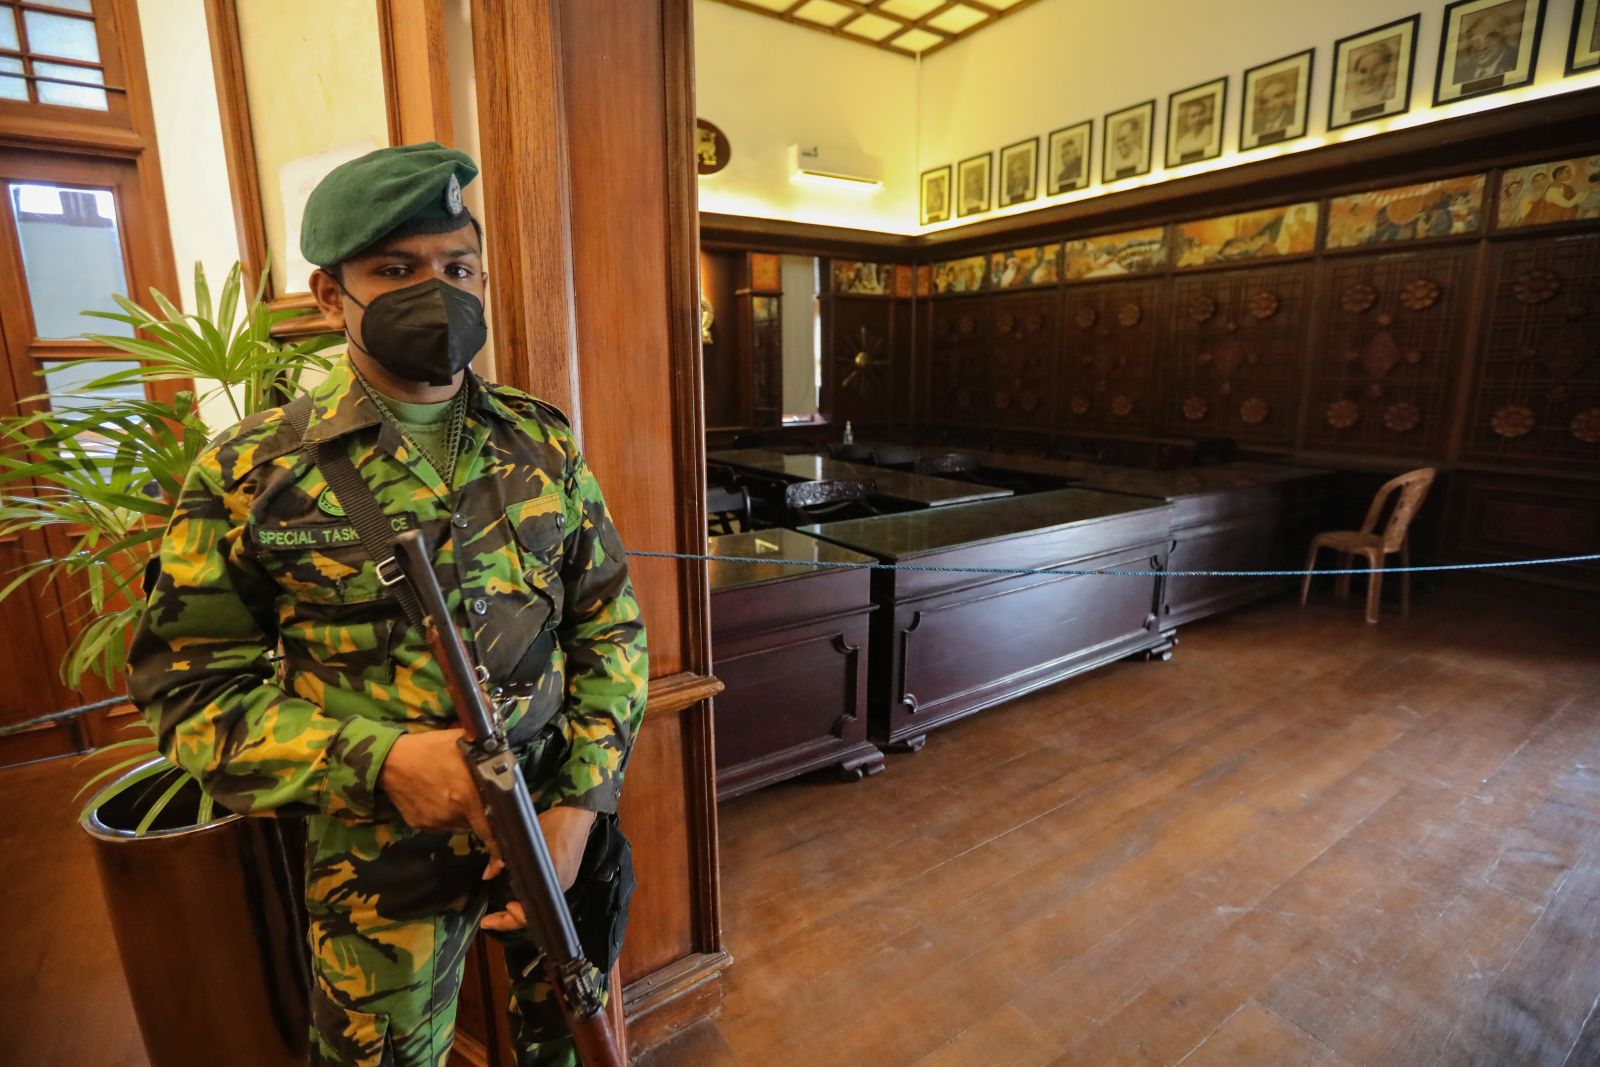 epa10070326 A Sri Lankan Special task force soldier stands guard inside the Prime Minister's office in Colombo, Sri Lanka, 14 July 2022. The protesters finally vacate from the President Palace, Prime Minister's Resident,  Prime Minister's office on 14 July after five days of their incursion. Thousands of protesters broke through police barricades and stormed in to the President Palace, President office, Prime Minister's Resident and Prime Minister's office on 09 July. Meanwhile, Sri Lankan authorities declared a state of emergency and imposed a curfew in the Western Province of the country on 13 July. According to the speaker of parliament, Sri Lankan President Gotabaya Rajapaksa has authorised the prime minister Prime Minister Ranil Wickremesinghe to carry out presidential duties after the president fled to the Maldives amid months of protests against the economic crisis.  EPA/CHAMILA KARUNARATHNE